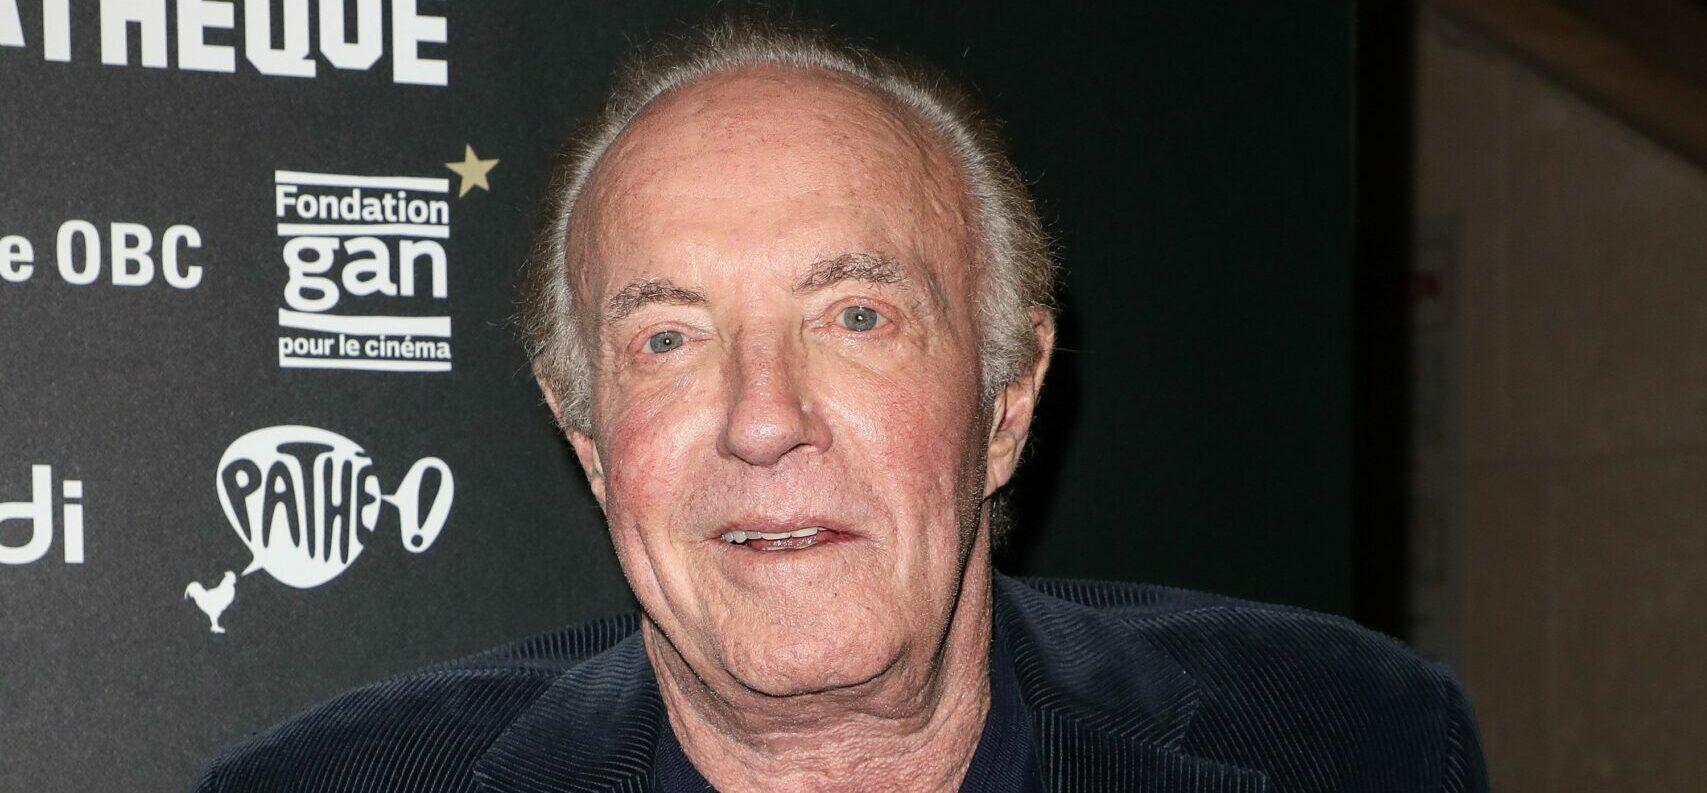 Speaking Ill Of The Dead: Gianni Russo On Late Actor James Caan